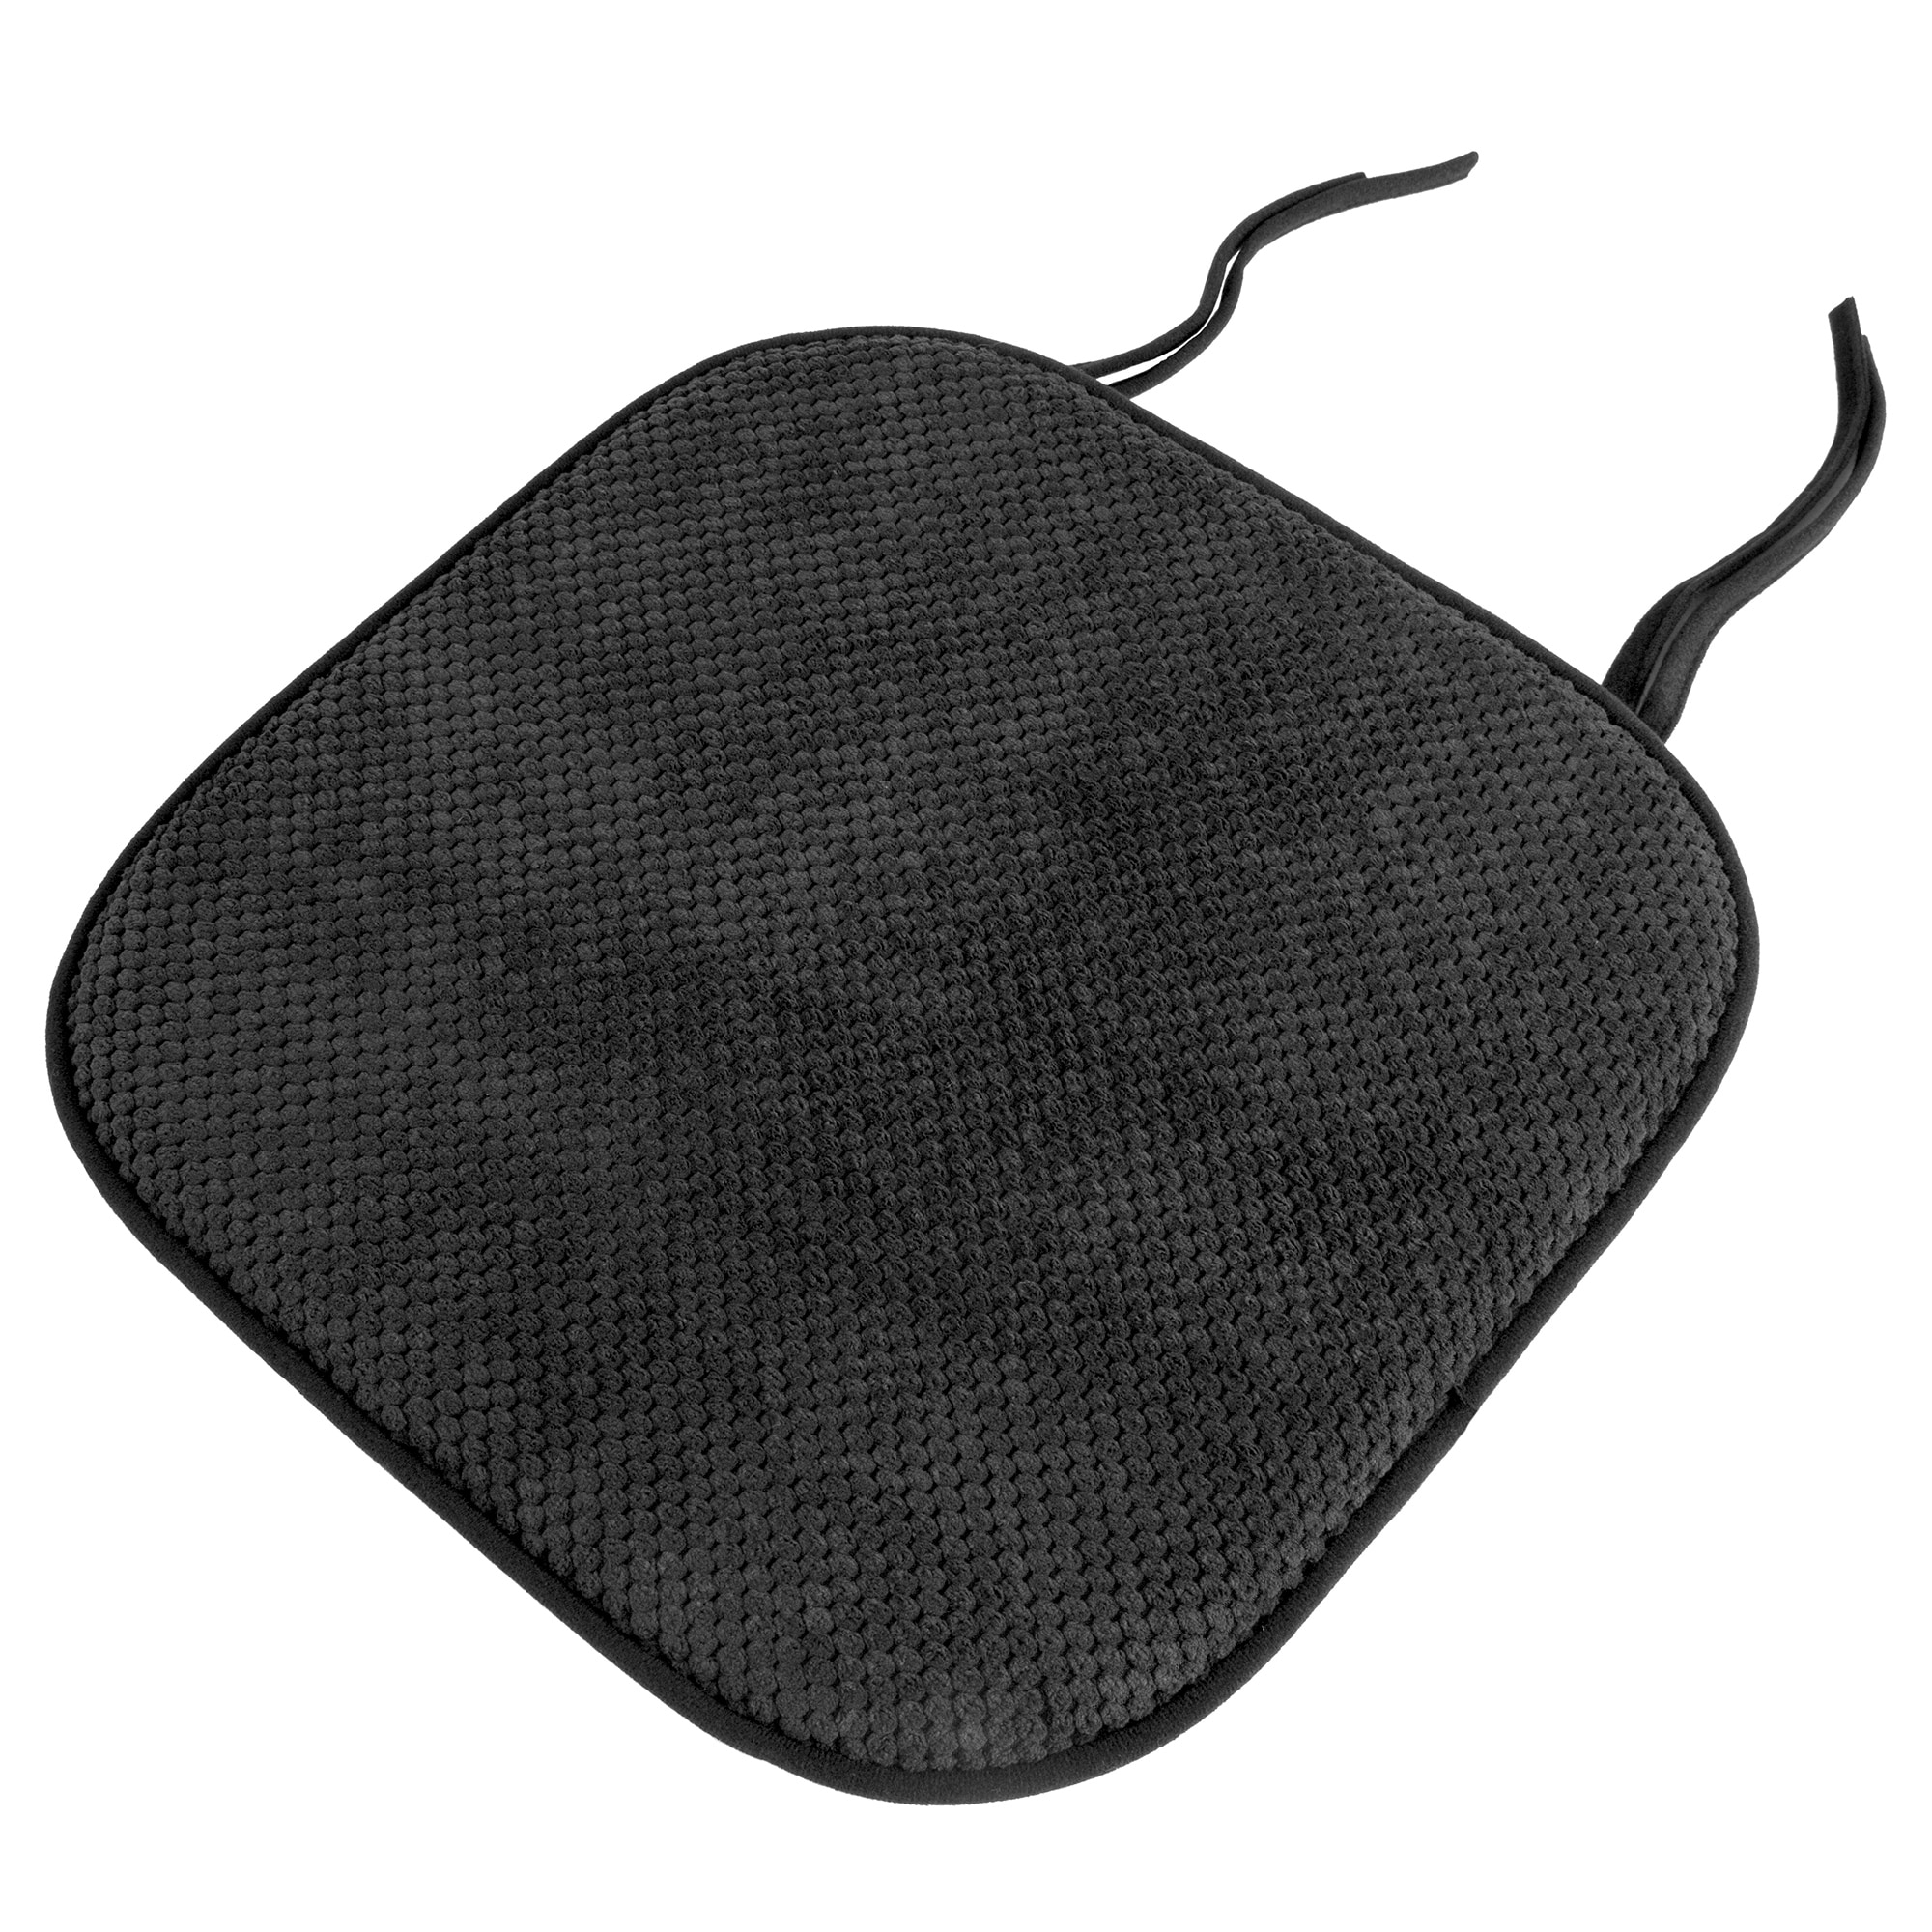 Memory Foam Chair Cushion - Machine Washable Pad With Nonslip Back - For  Dining Room, Kitchen, Outdoor Patio And Desk Chairs By Lavish Home  (charcoal) : Target